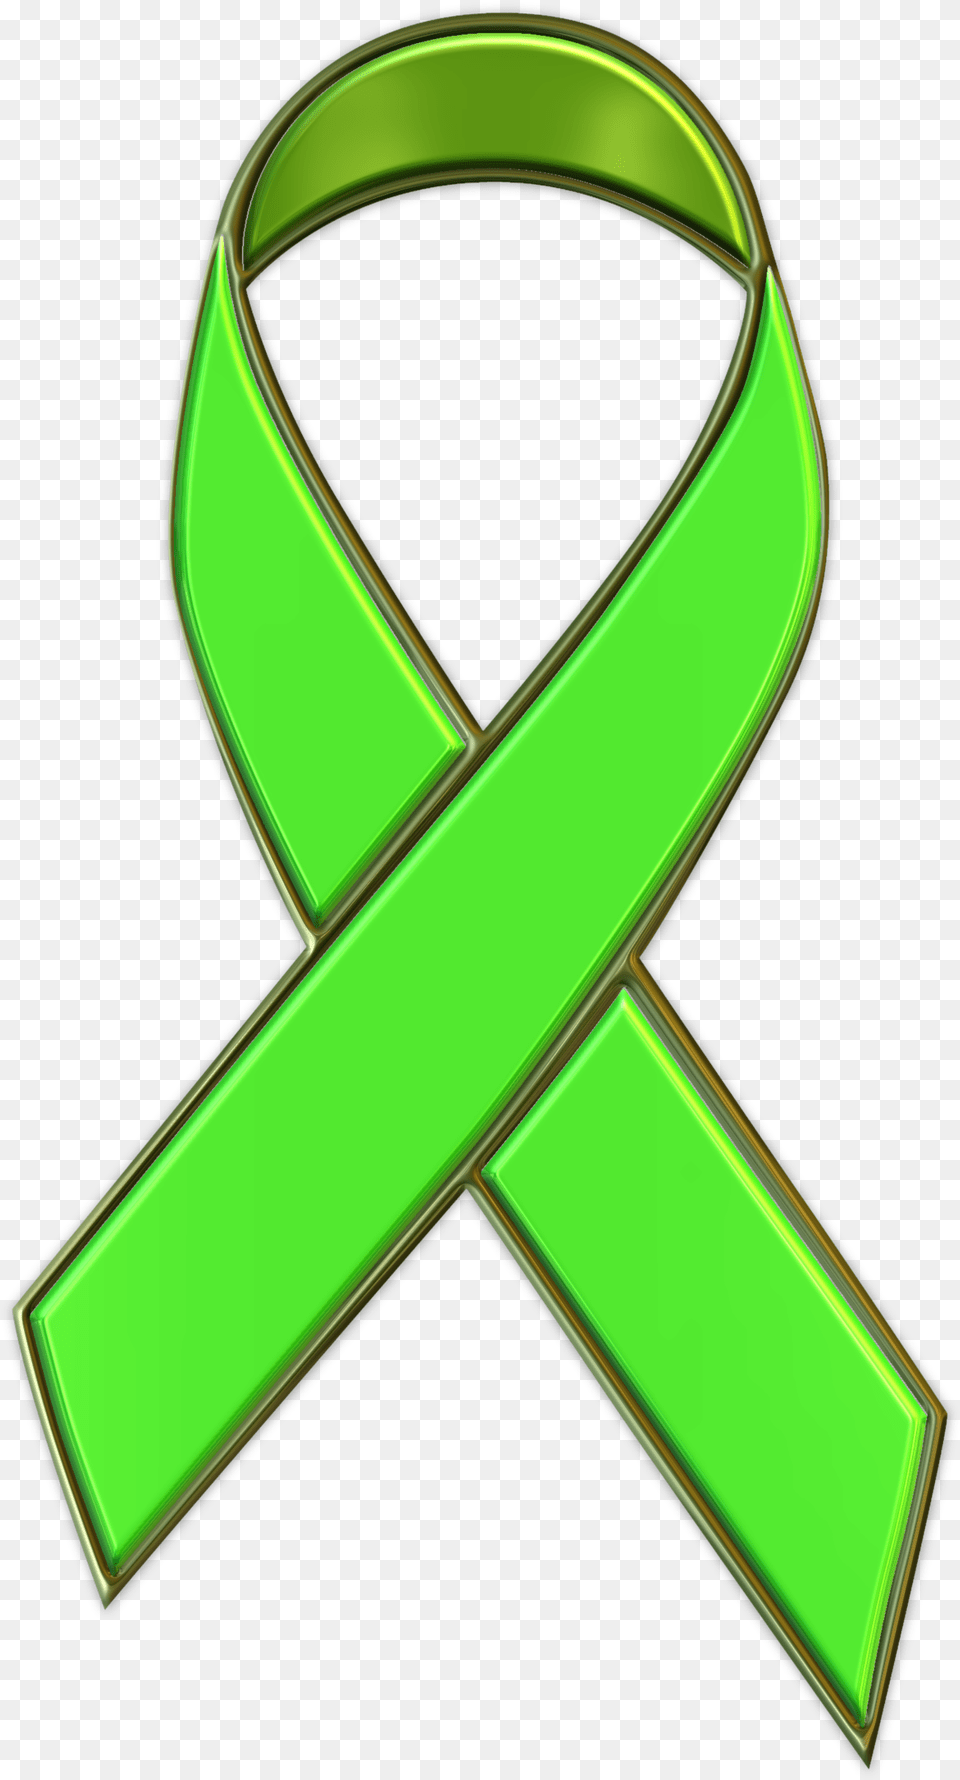 Clip Arts Related To Purple Ribbon No Background Green Mental Health Ribbon, Symbol Free Png Download